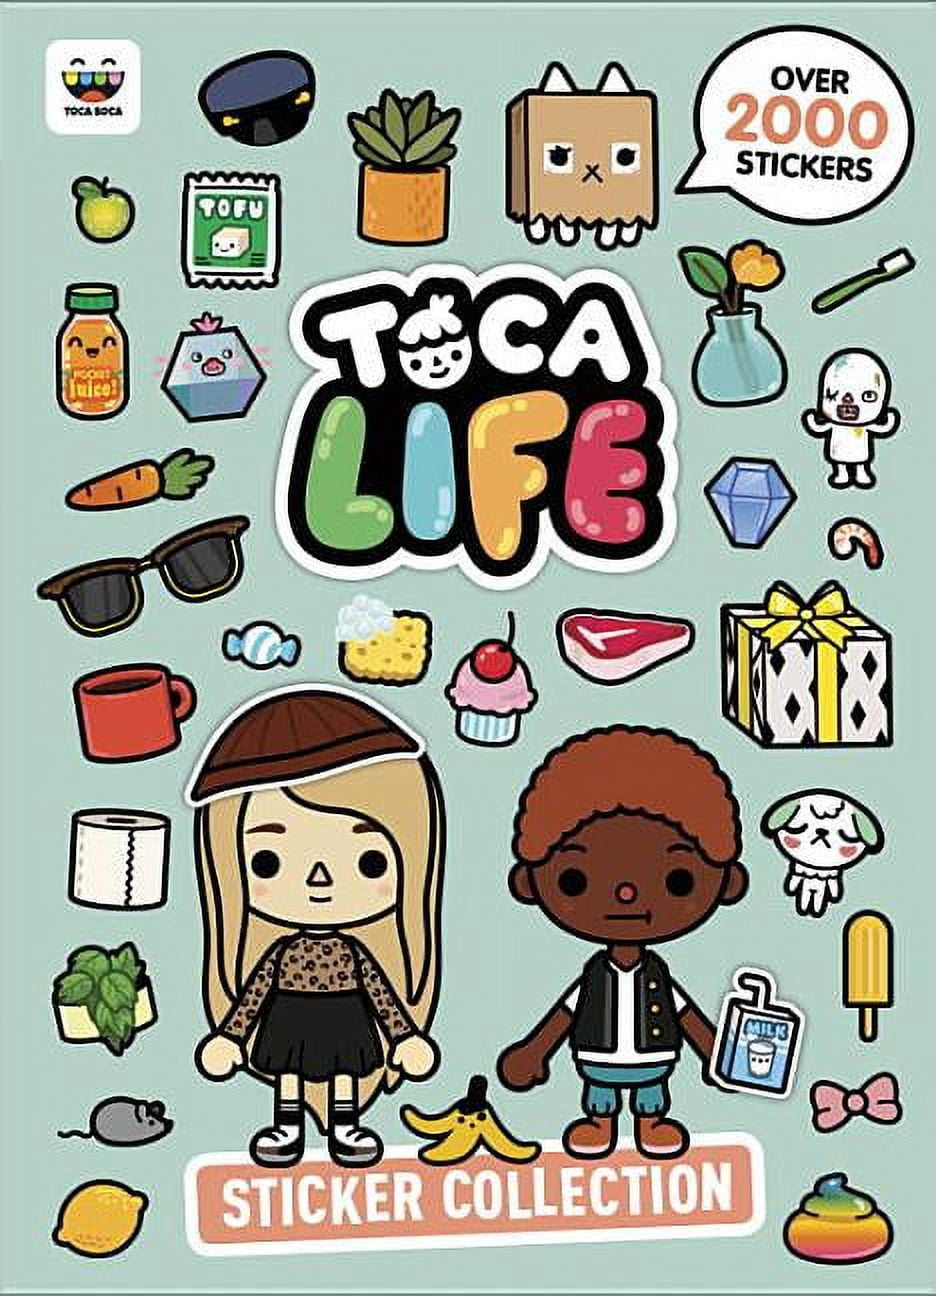 In this photo illustration a Toca Life Neighborhood appliance by